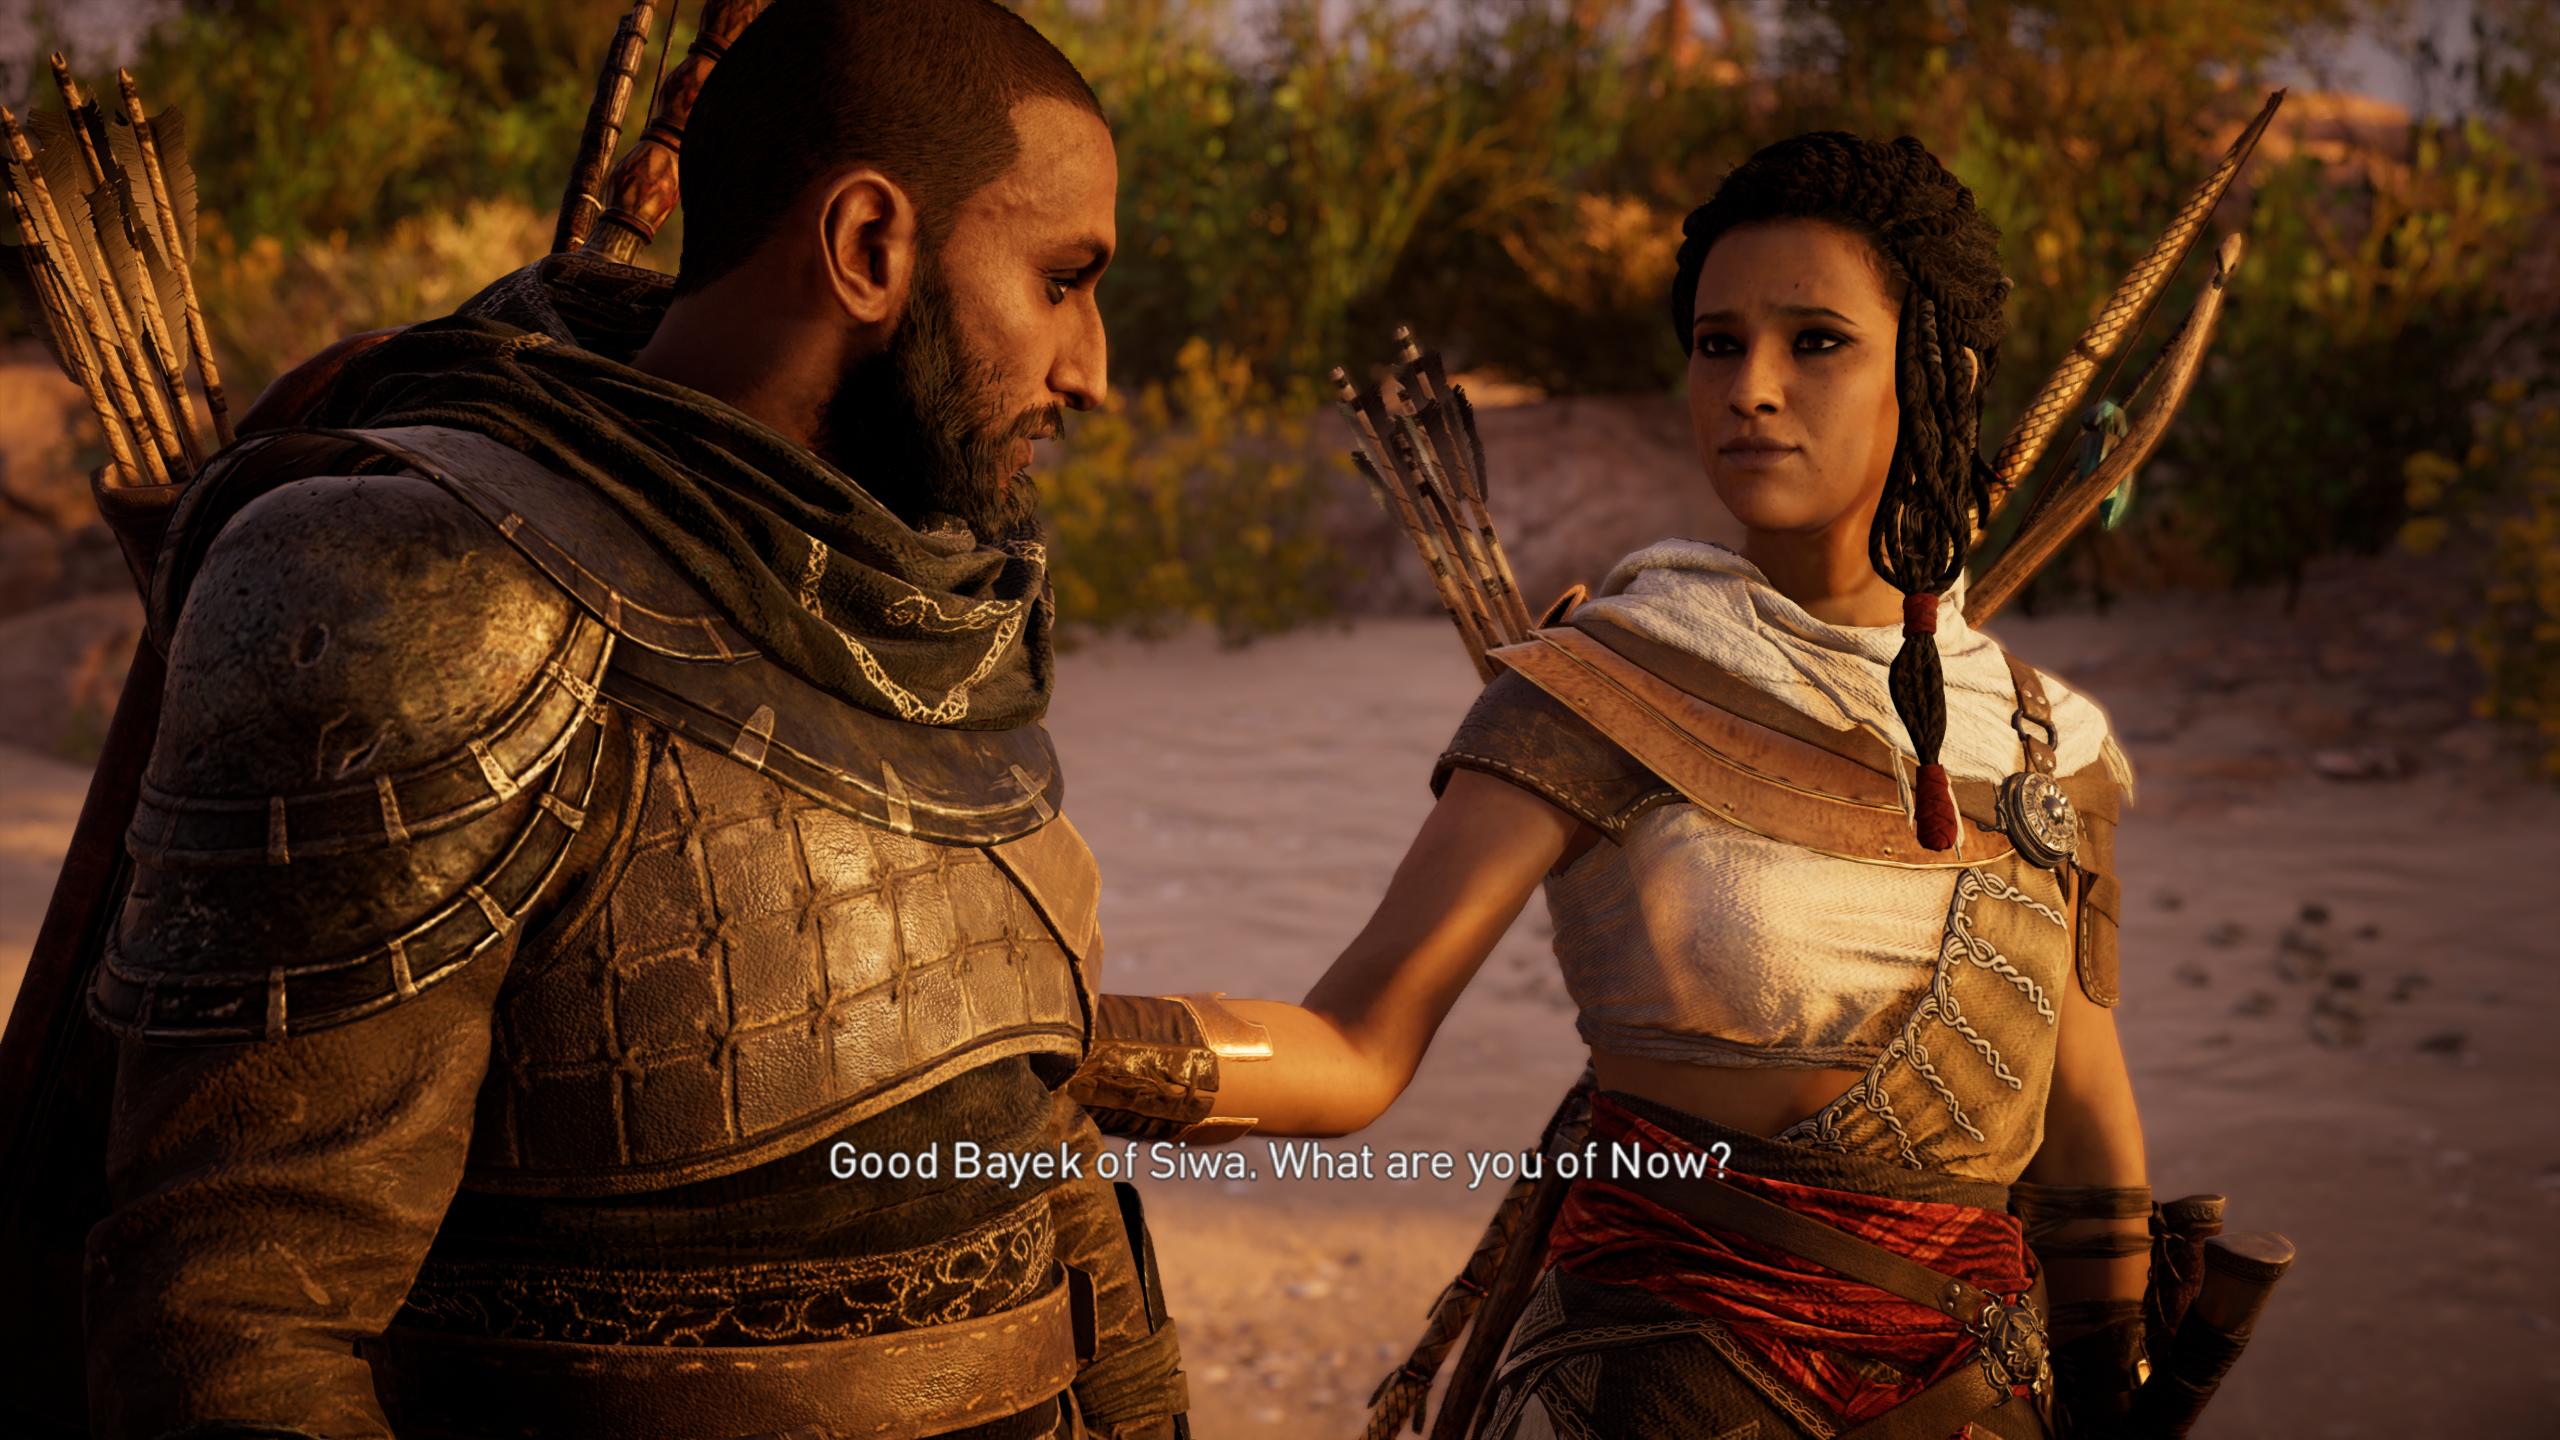 What We Liked (And Didn’t Like) About Assassin’s Creed Origins’ Story